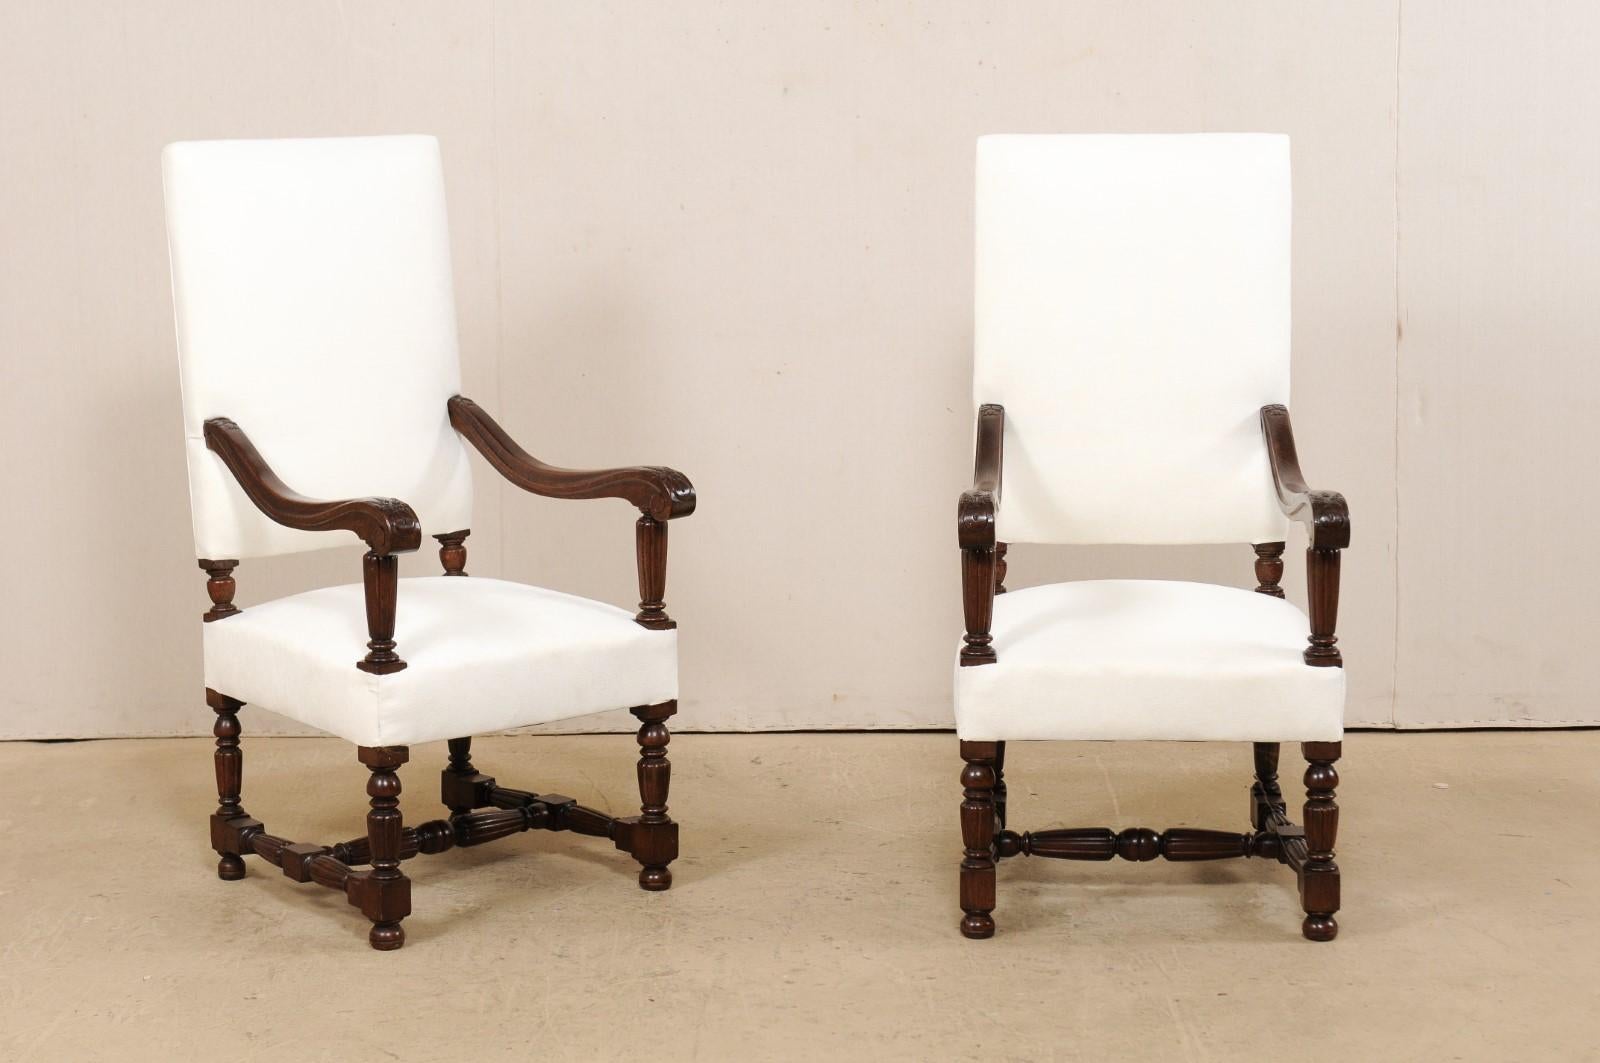 An Italian pair of carved-wood armchairs with newly upholstered fabric from the 19th century. These antique chairs from Italy each have a large rectangular-shaped back, with gracefully carved wooden arms that gently slope and terminate into scrolled